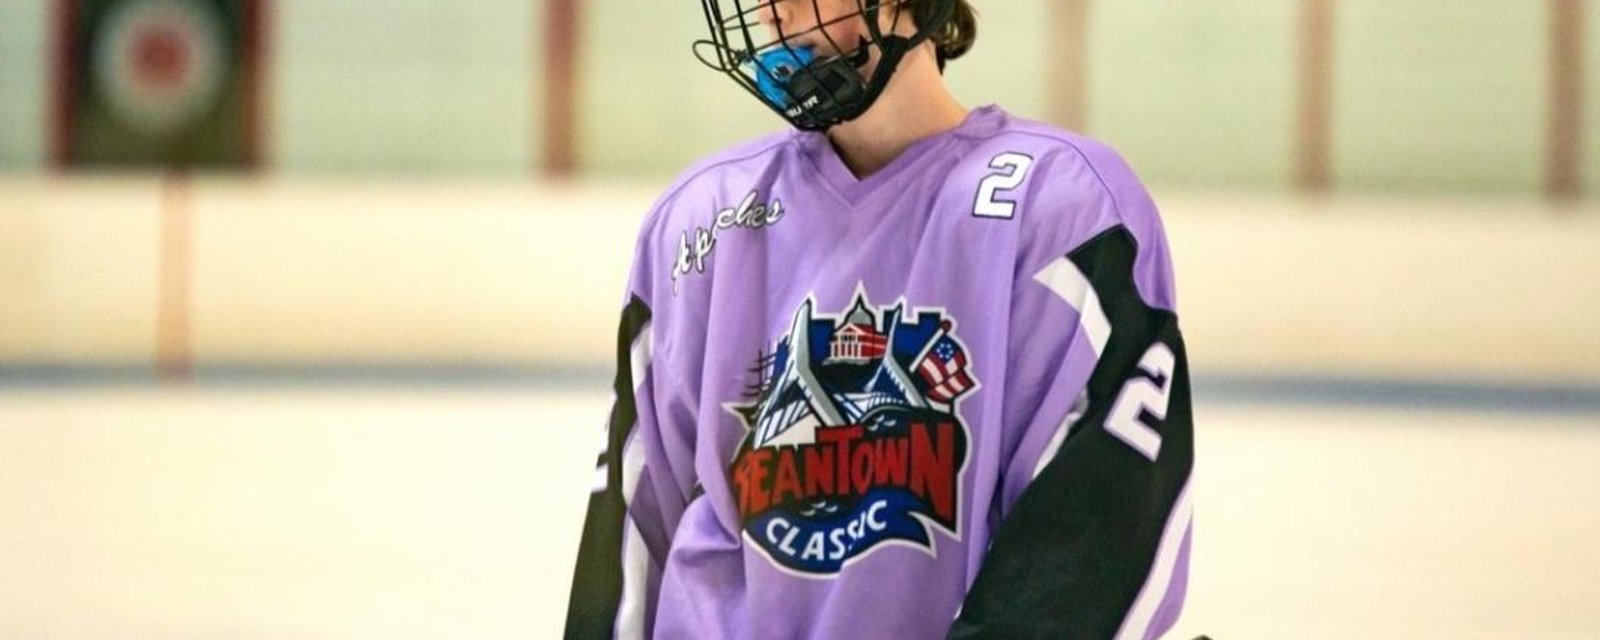 13 year old hockey player dies during training camp.